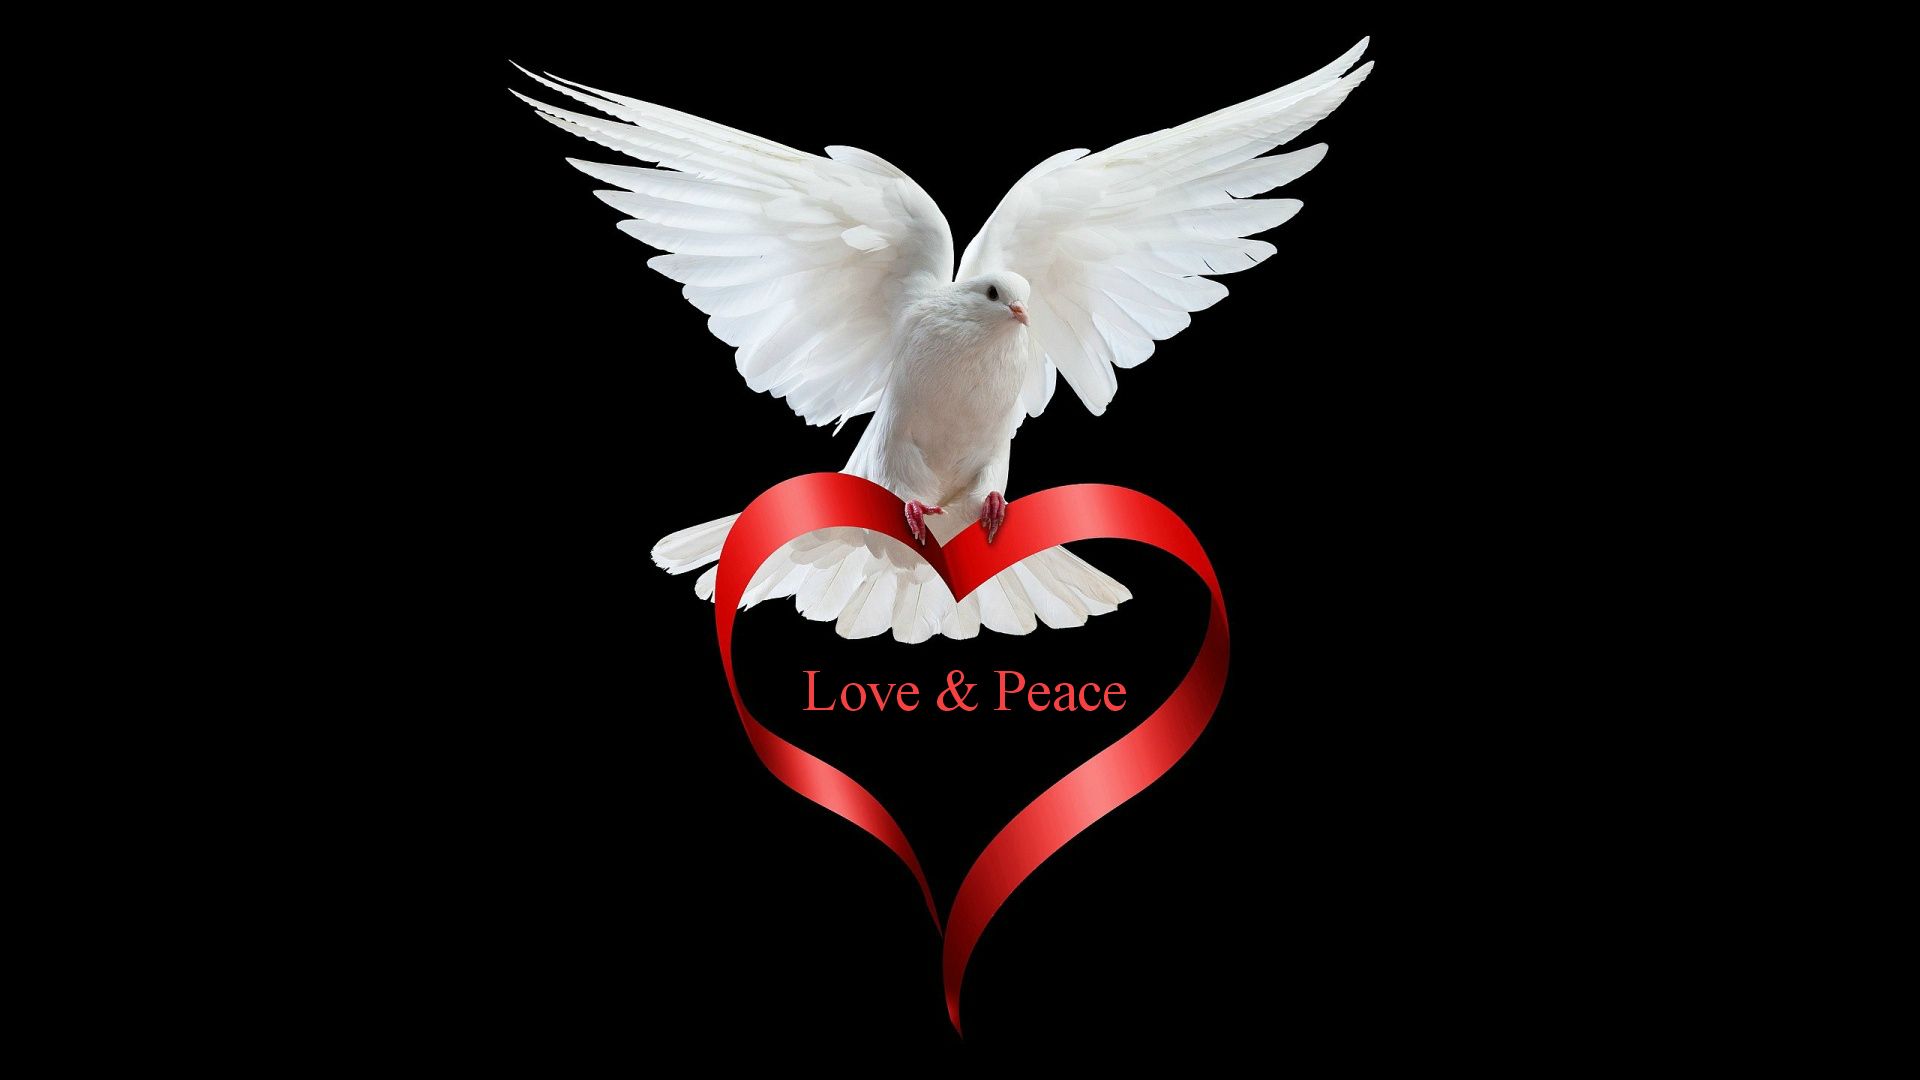 Love And Peace Wallpapers 23 Free Hd Wallpaper - XDwallpaper.com